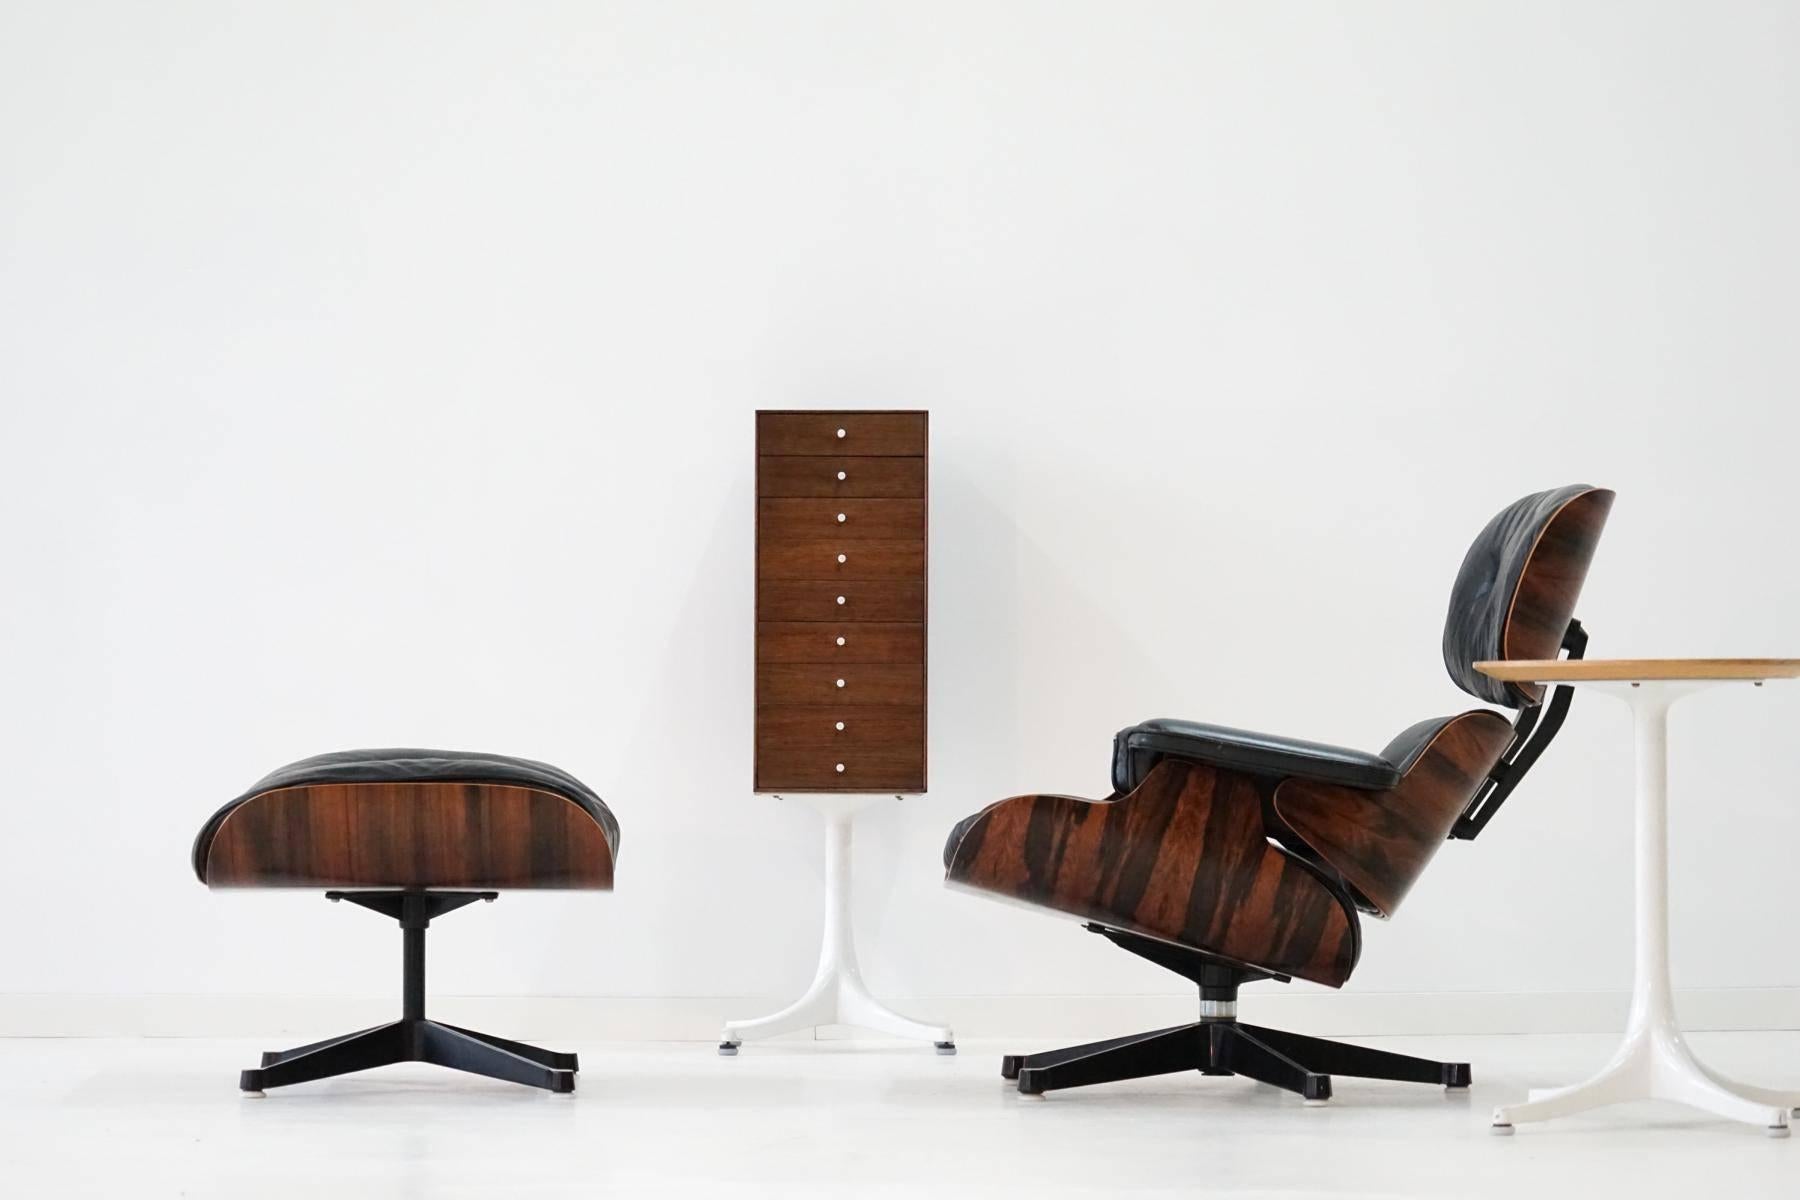 Original lounge chair and ottoman by Charles Eames Herman Miller rosewood armchair.
This lounge chair and ottoman has been produced in the manufacture of Herman Miller. The lounge chair is very comfortable thanks to the feather filling. The unique